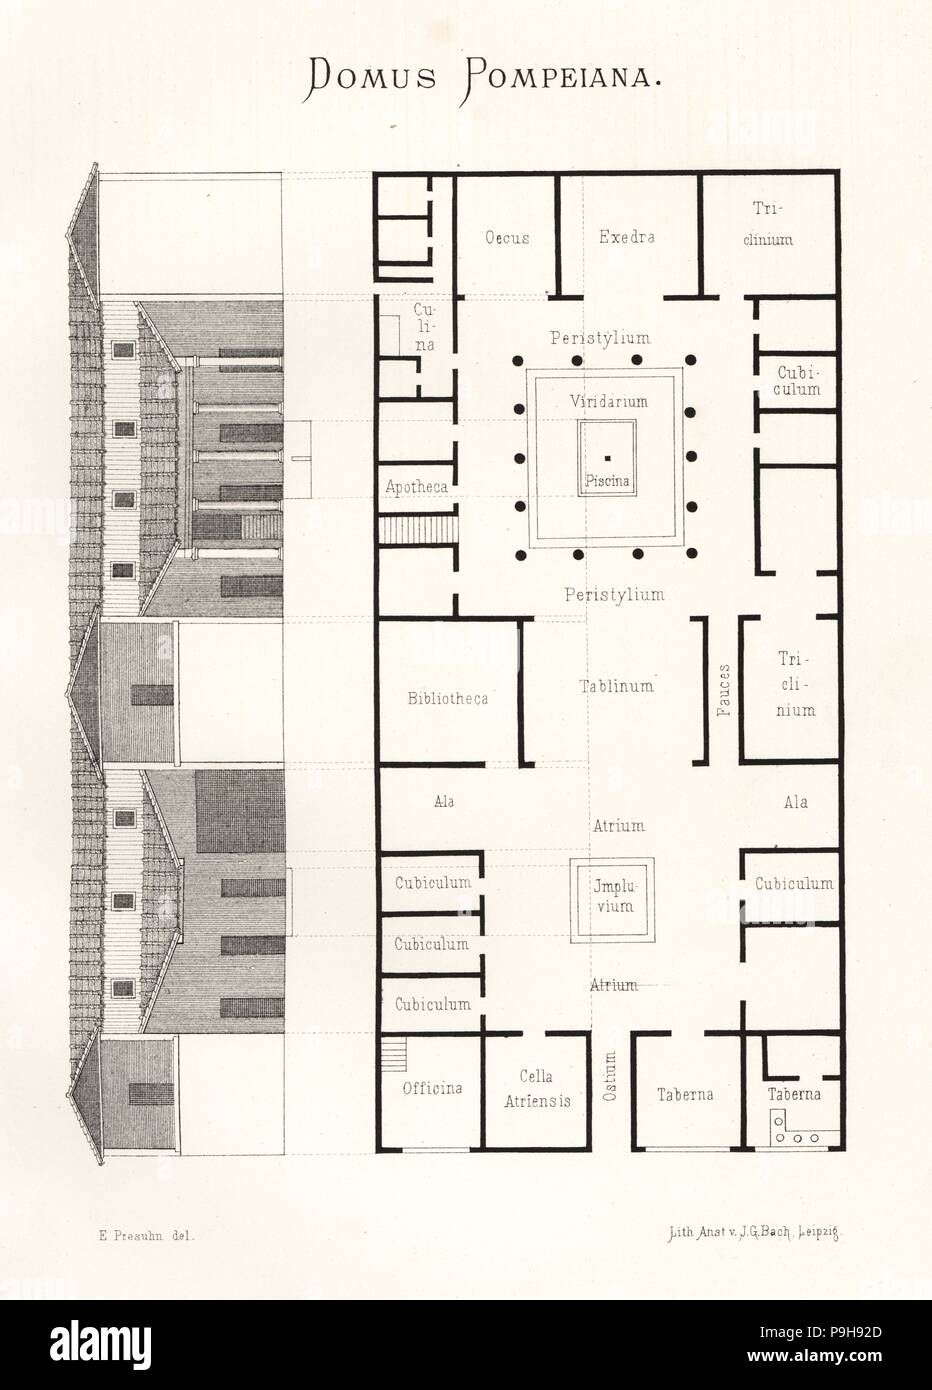 Elevation And Floor Plan Of A House In Pompeii Showing The Oecus